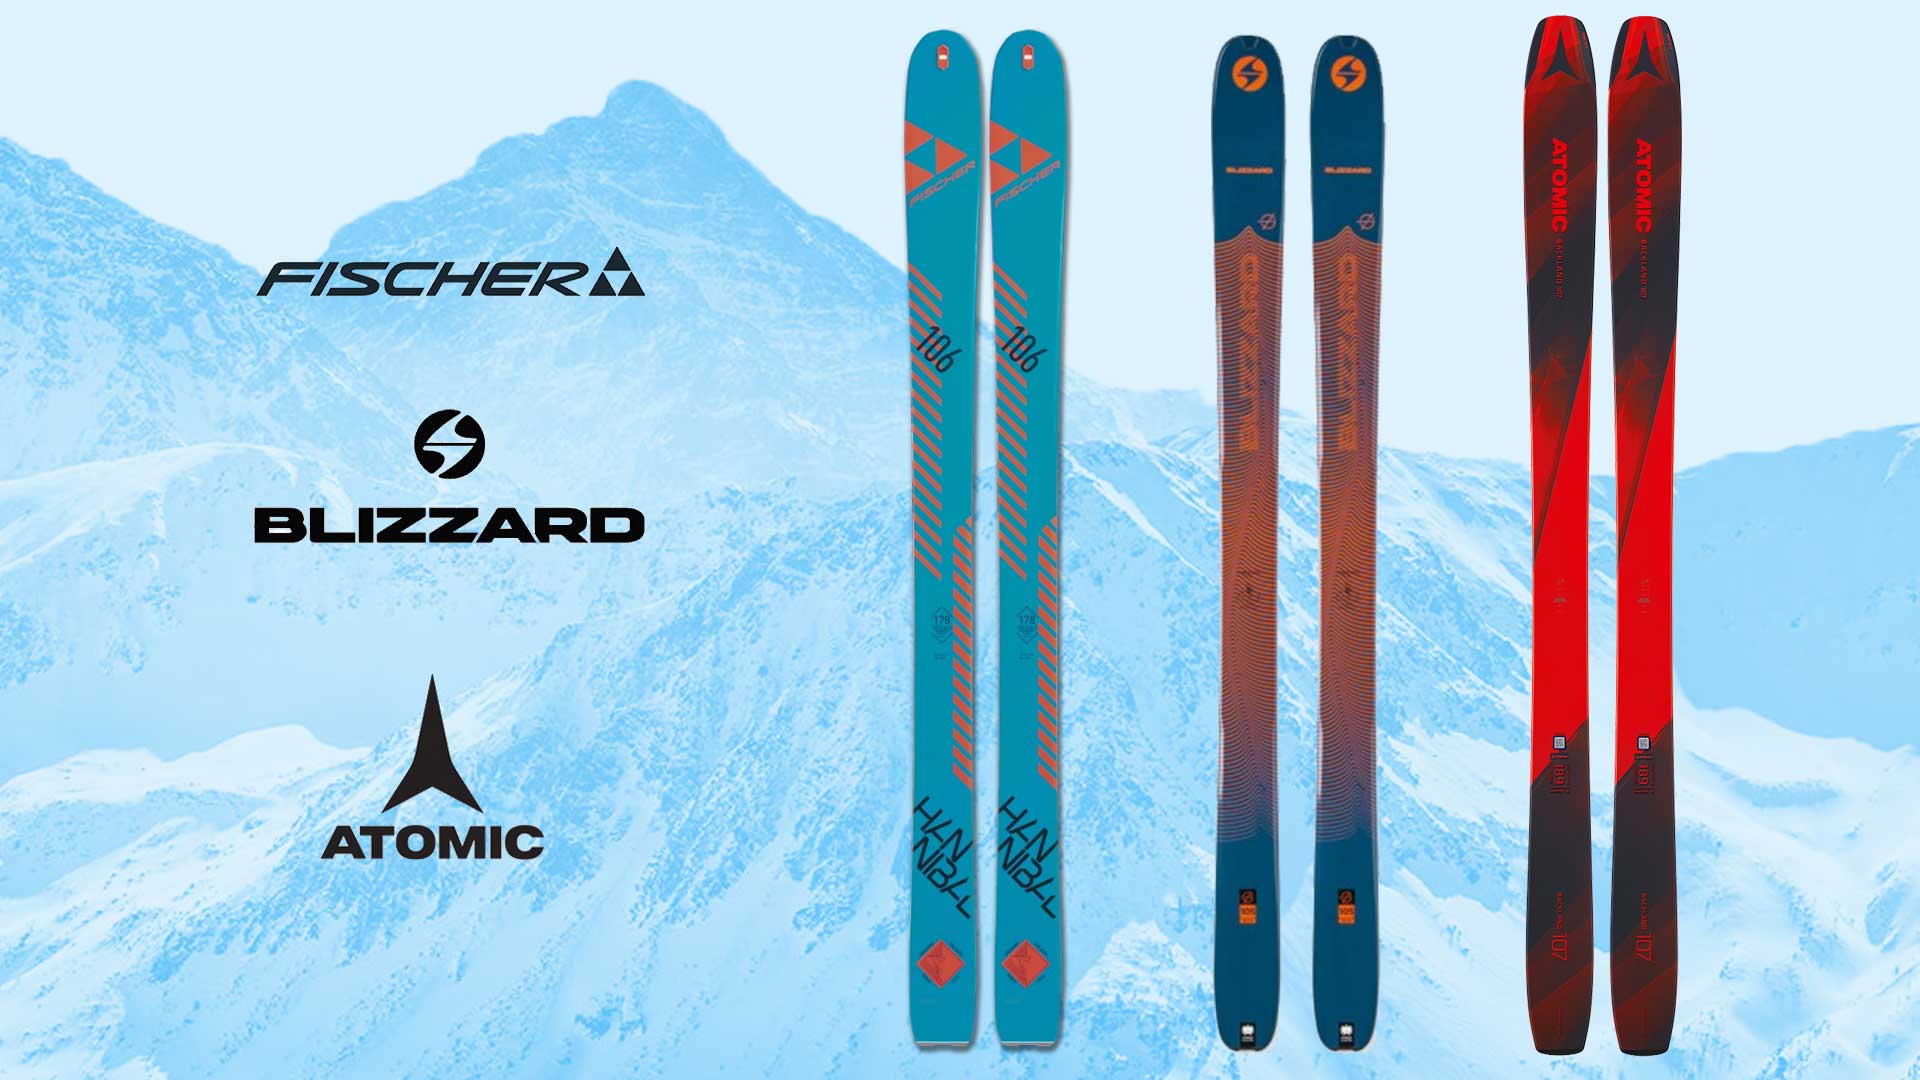 An illustration that shows brand logos, a blue and orange Hanibal Fischer ski board, a blue and orange Blizzard ski board, and a red and dark gray Atomic ski board against a blue snowy mountain in the background. Fischer logo, Blazzard logo, Atomic logo